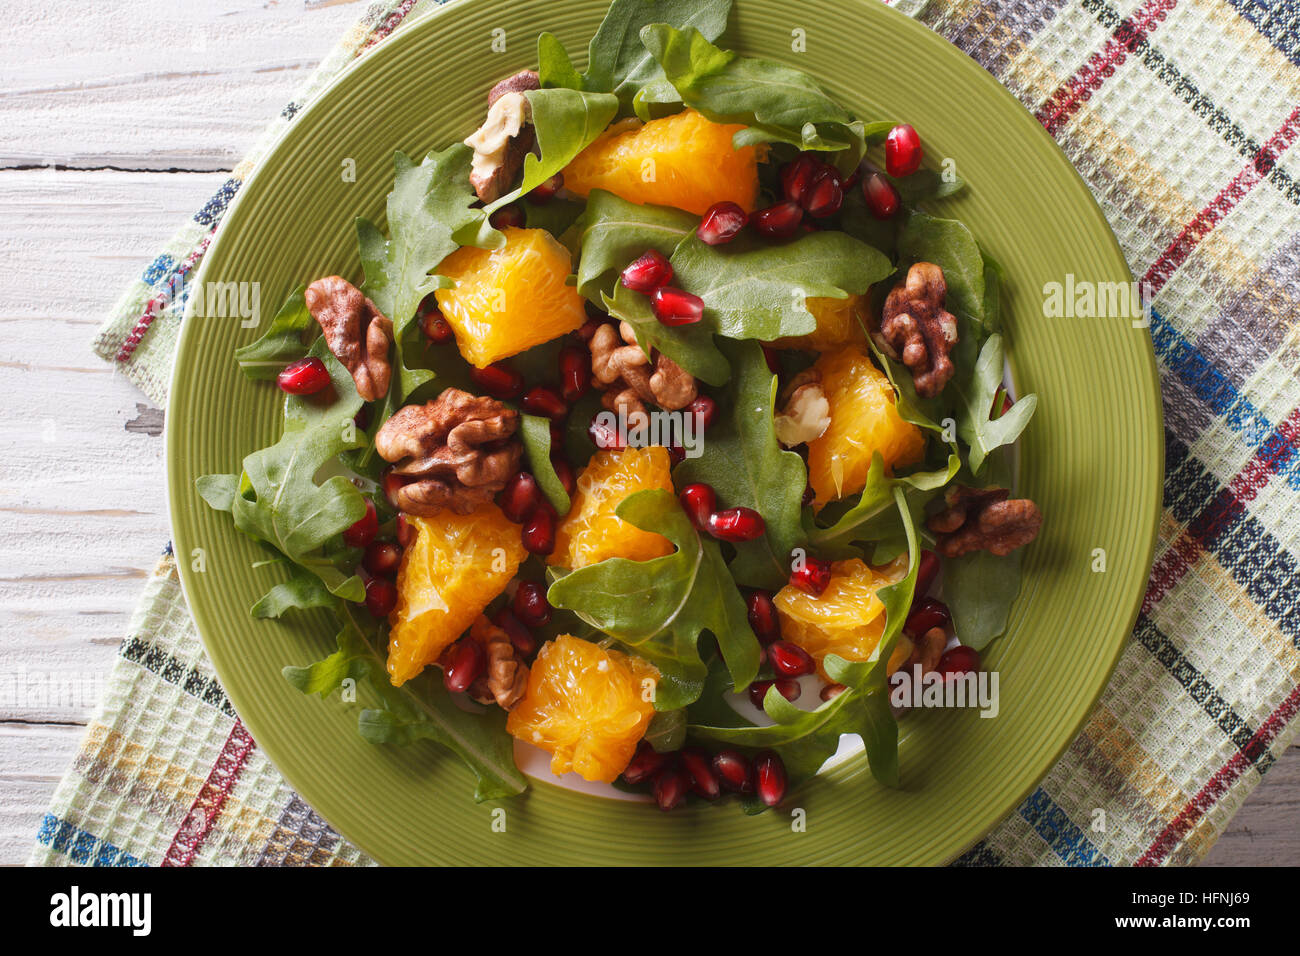 Delicious salad with pomegranate, oranges, walnuts and arugula close-up on the table. horizontal top view Stock Photo